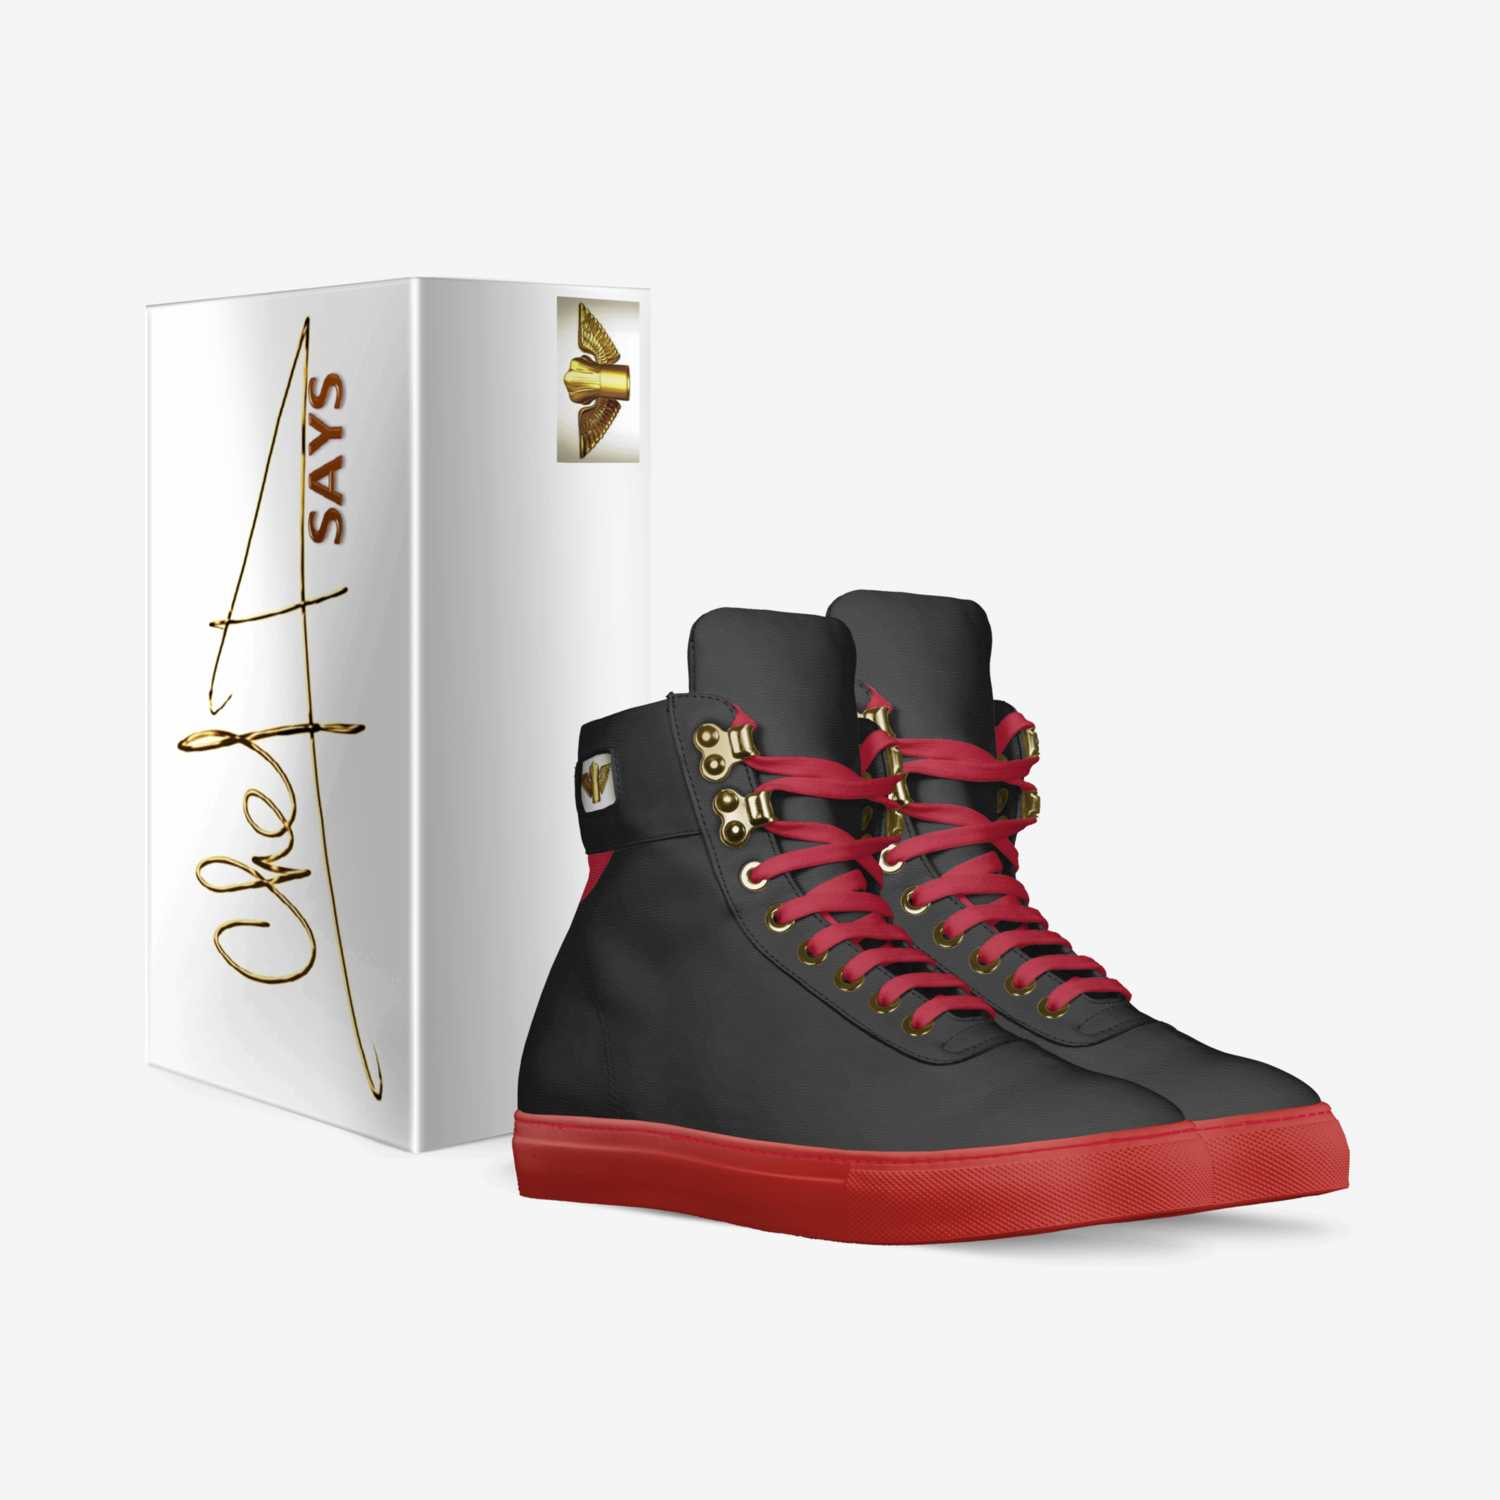 Challenger Series custom made in Italy shoes by Chef Daniel Young | Box view